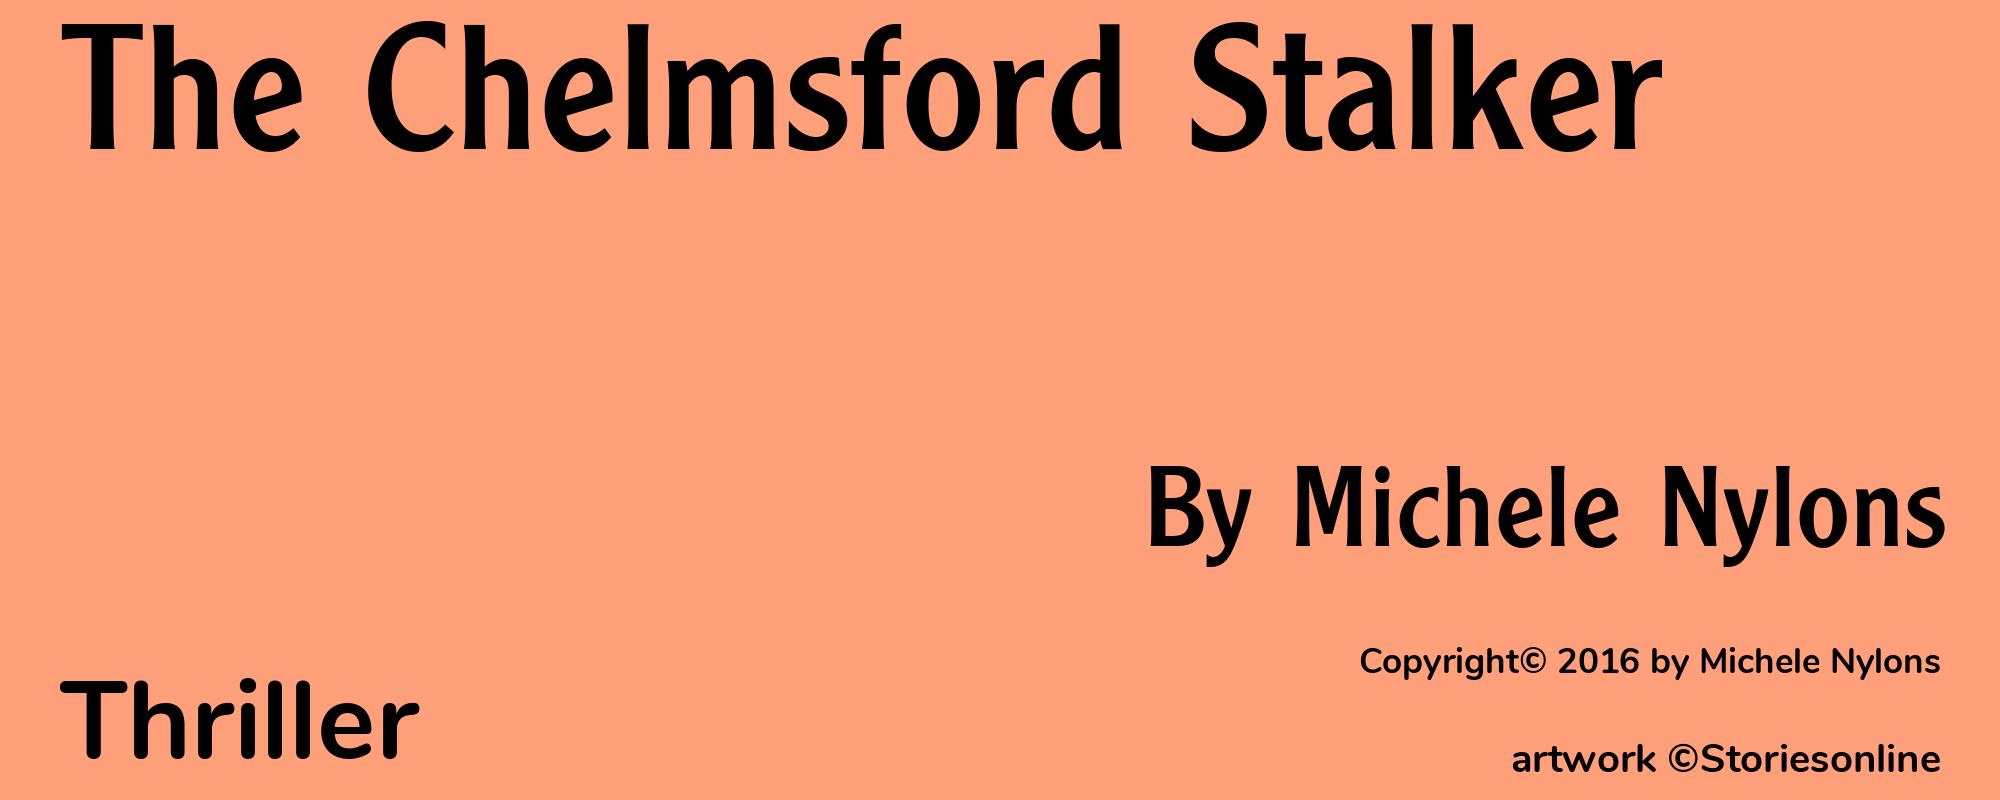 The Chelmsford Stalker - Cover